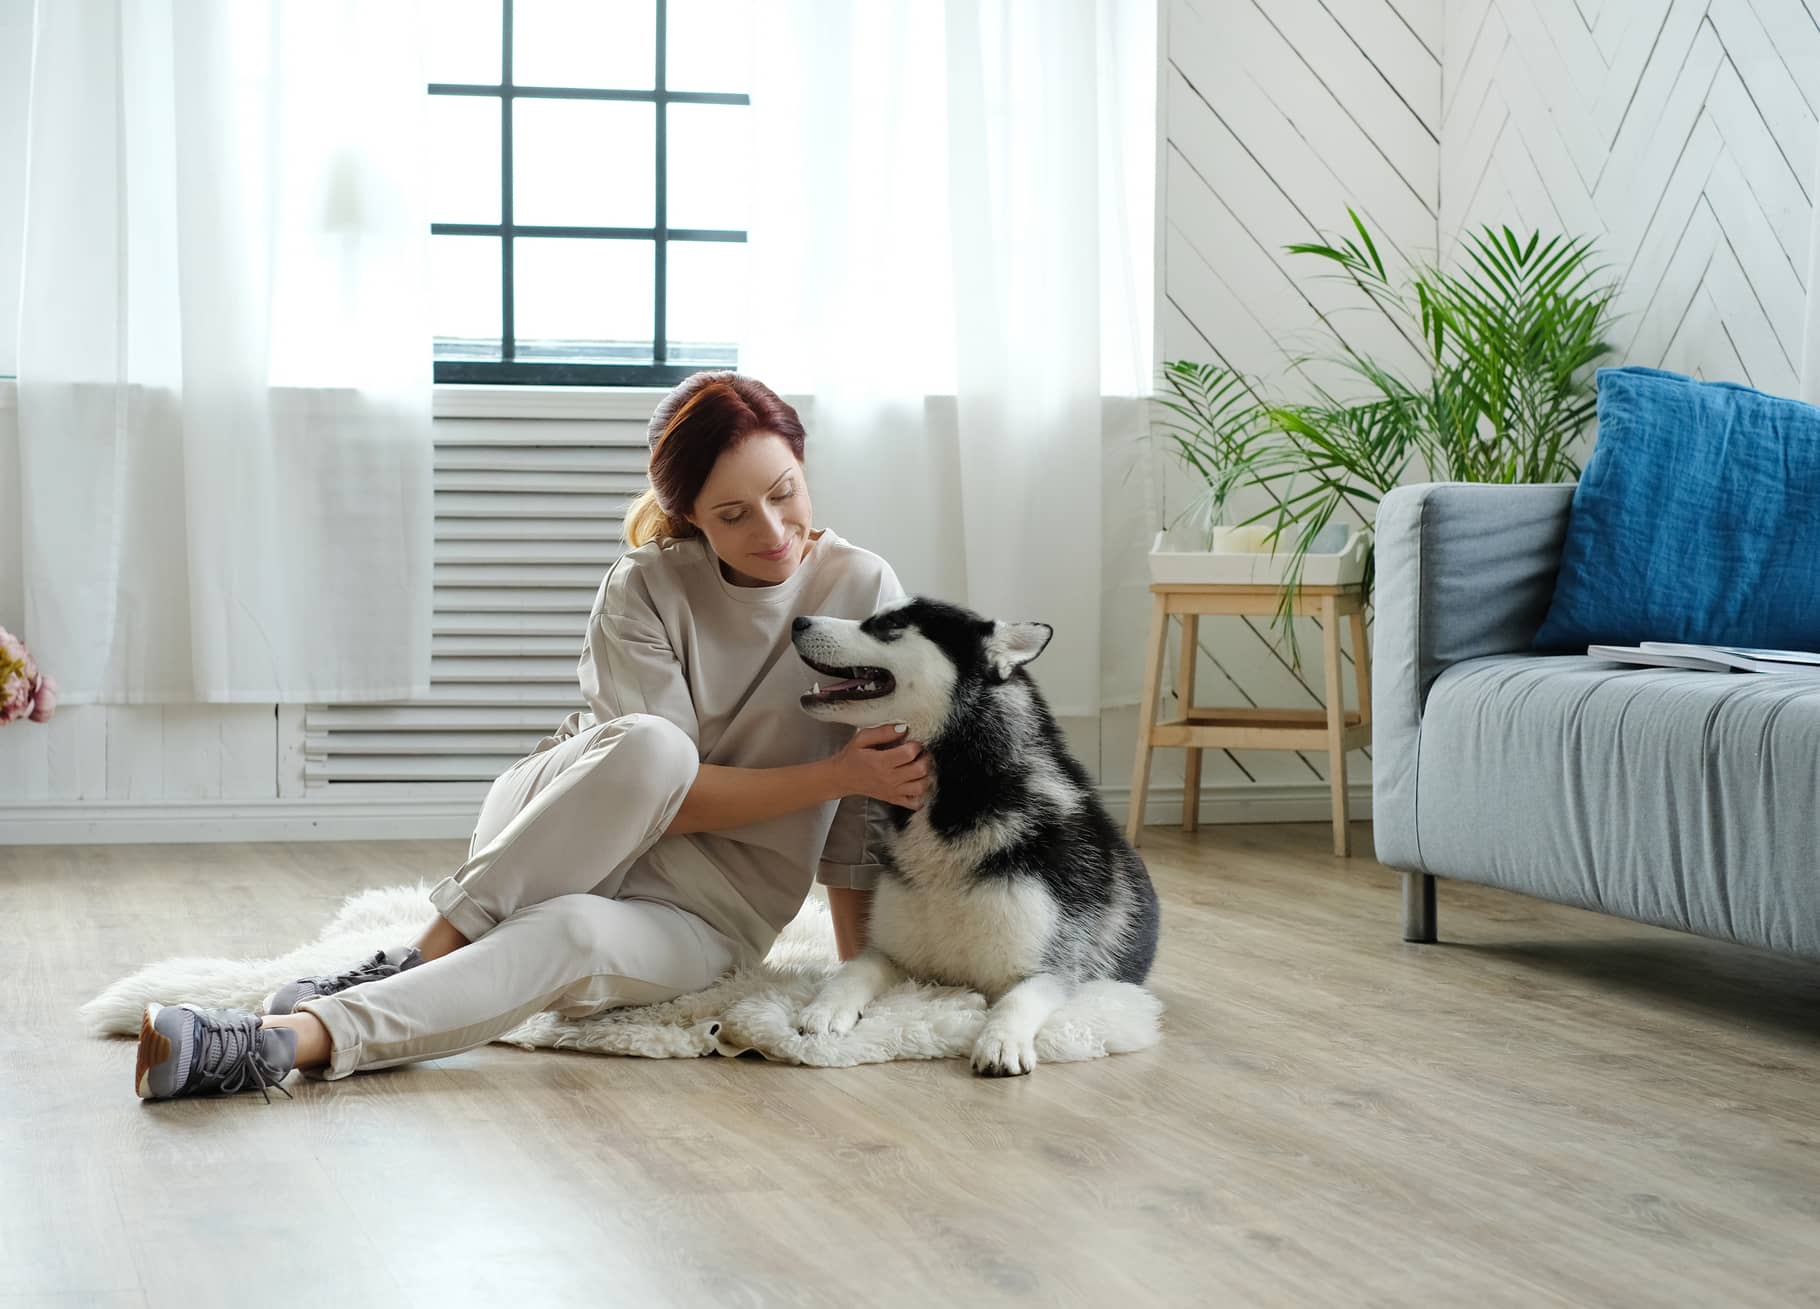 HAVE PETS AT HOME? TIPS ON HOW TO REMOVE PET HAIR FROM CARPET